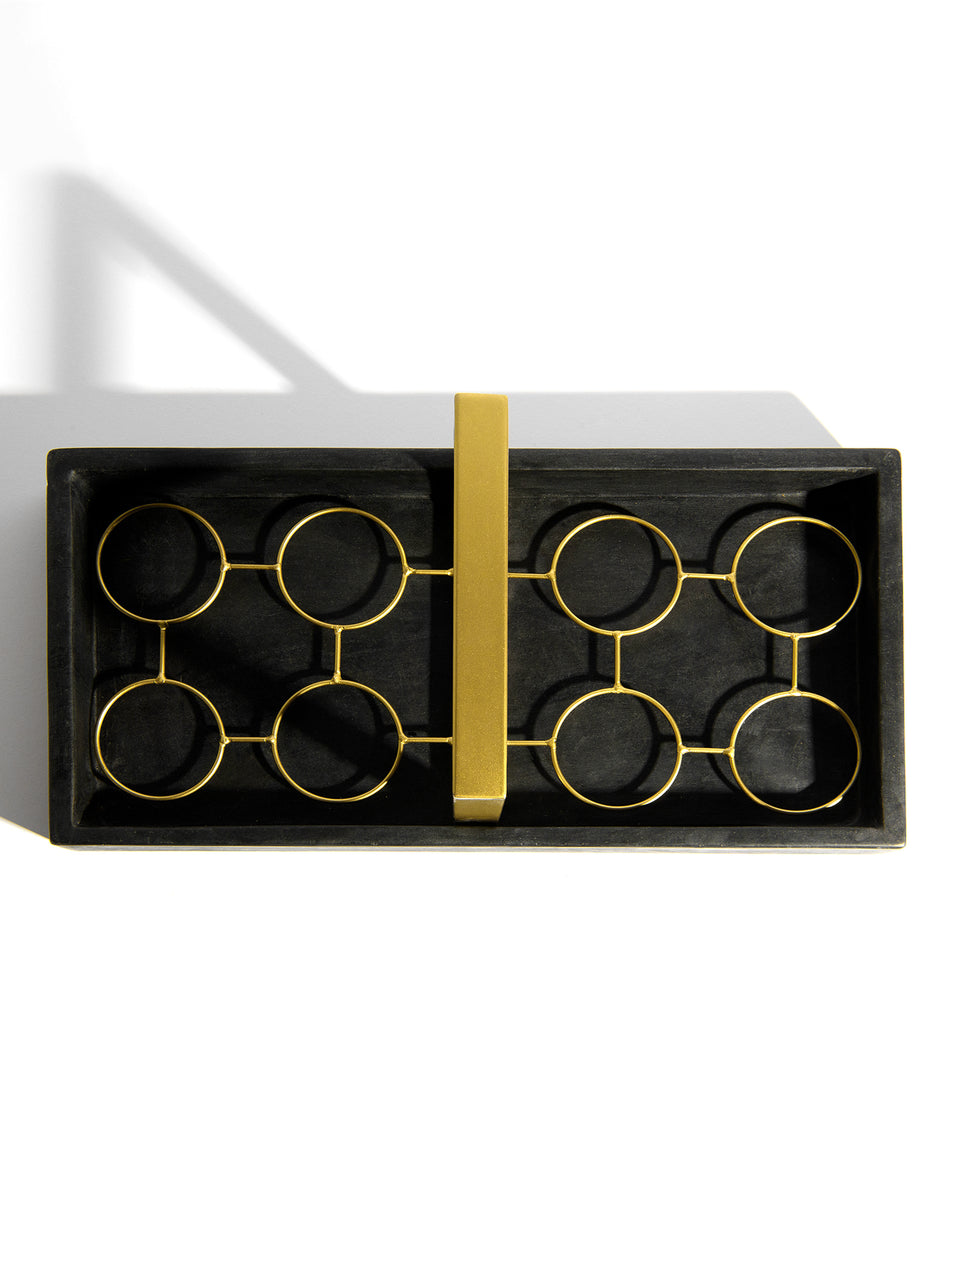 Modern Marble Tray with Gold Caddy